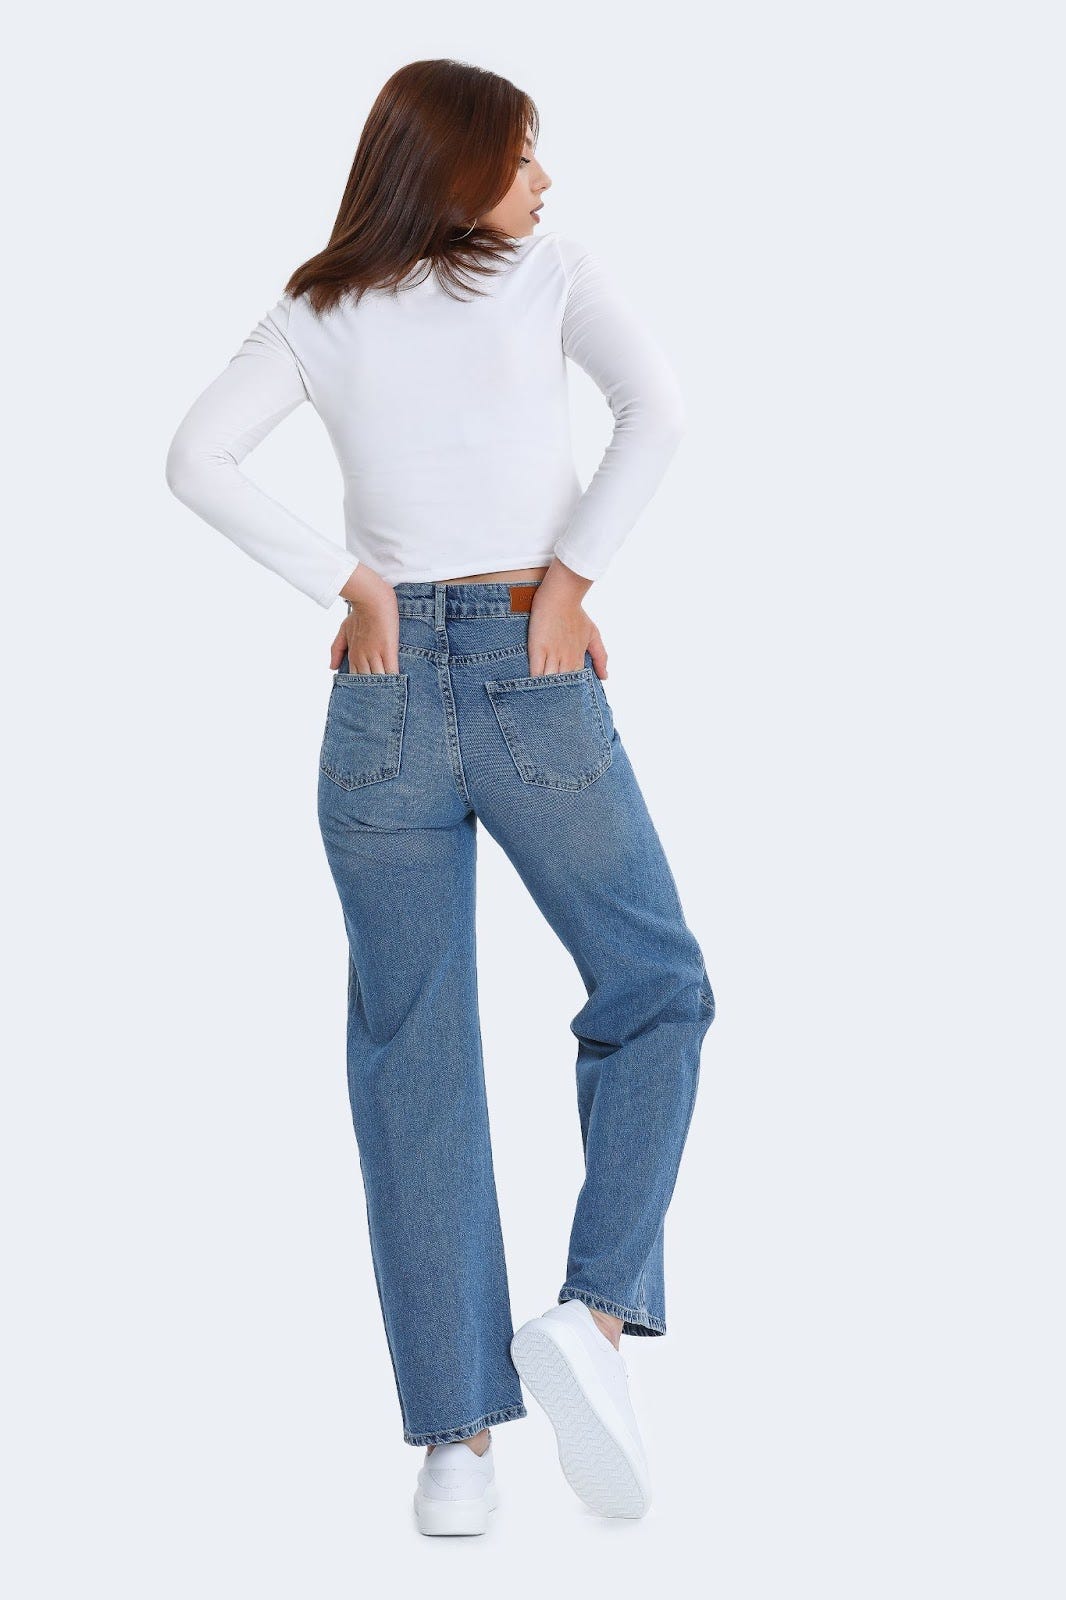 How Do You Know If Jeans Are Too Tight?, by WomenDresses